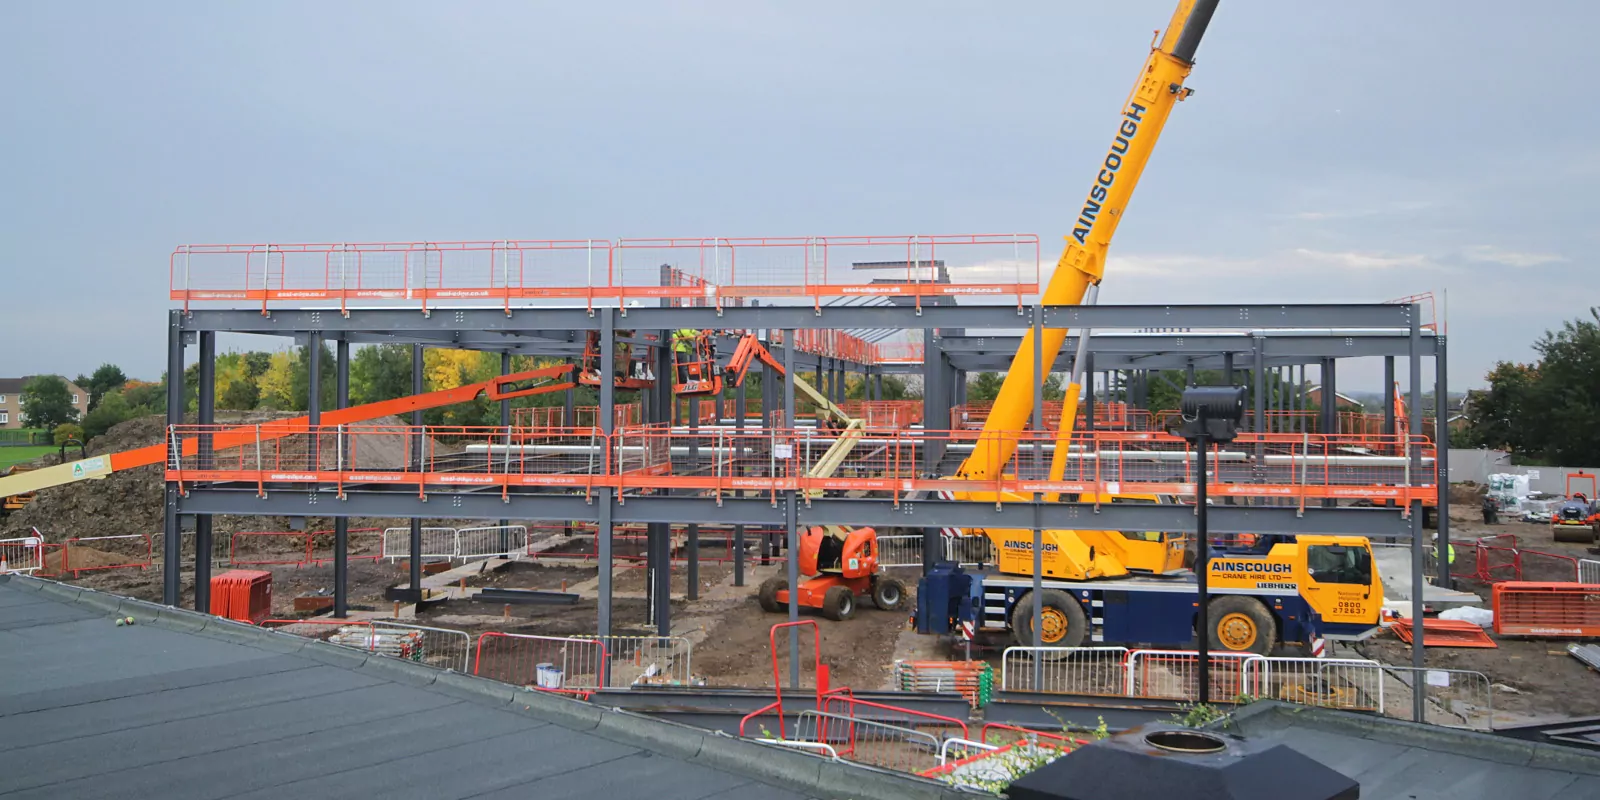 Steel erection for Thorndown Primary School. Time-lapsing school builds.